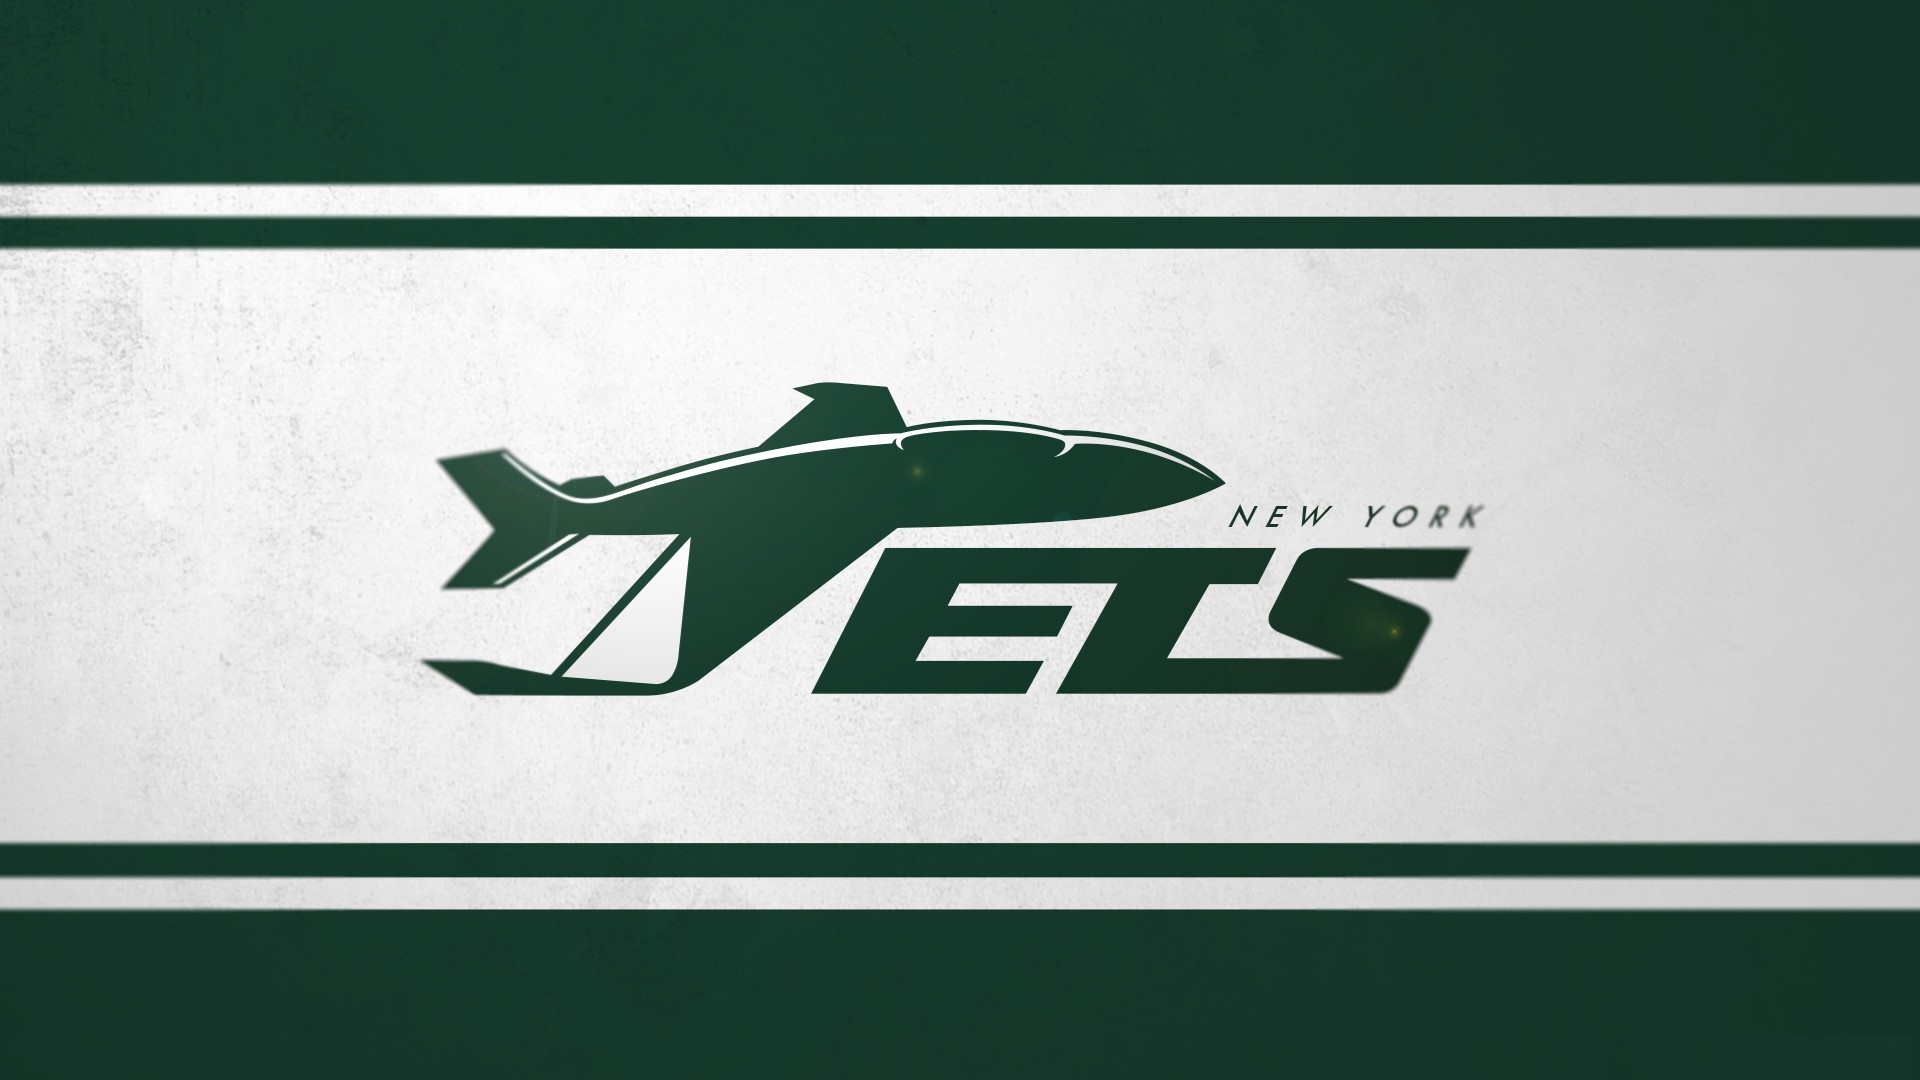 Wallpapers HD New York Jets With Resolution 1920X1080 pixel. You can make this wallpaper for your Mac or Windows Desktop Background, iPhone, Android or Tablet and another Smartphone device for free